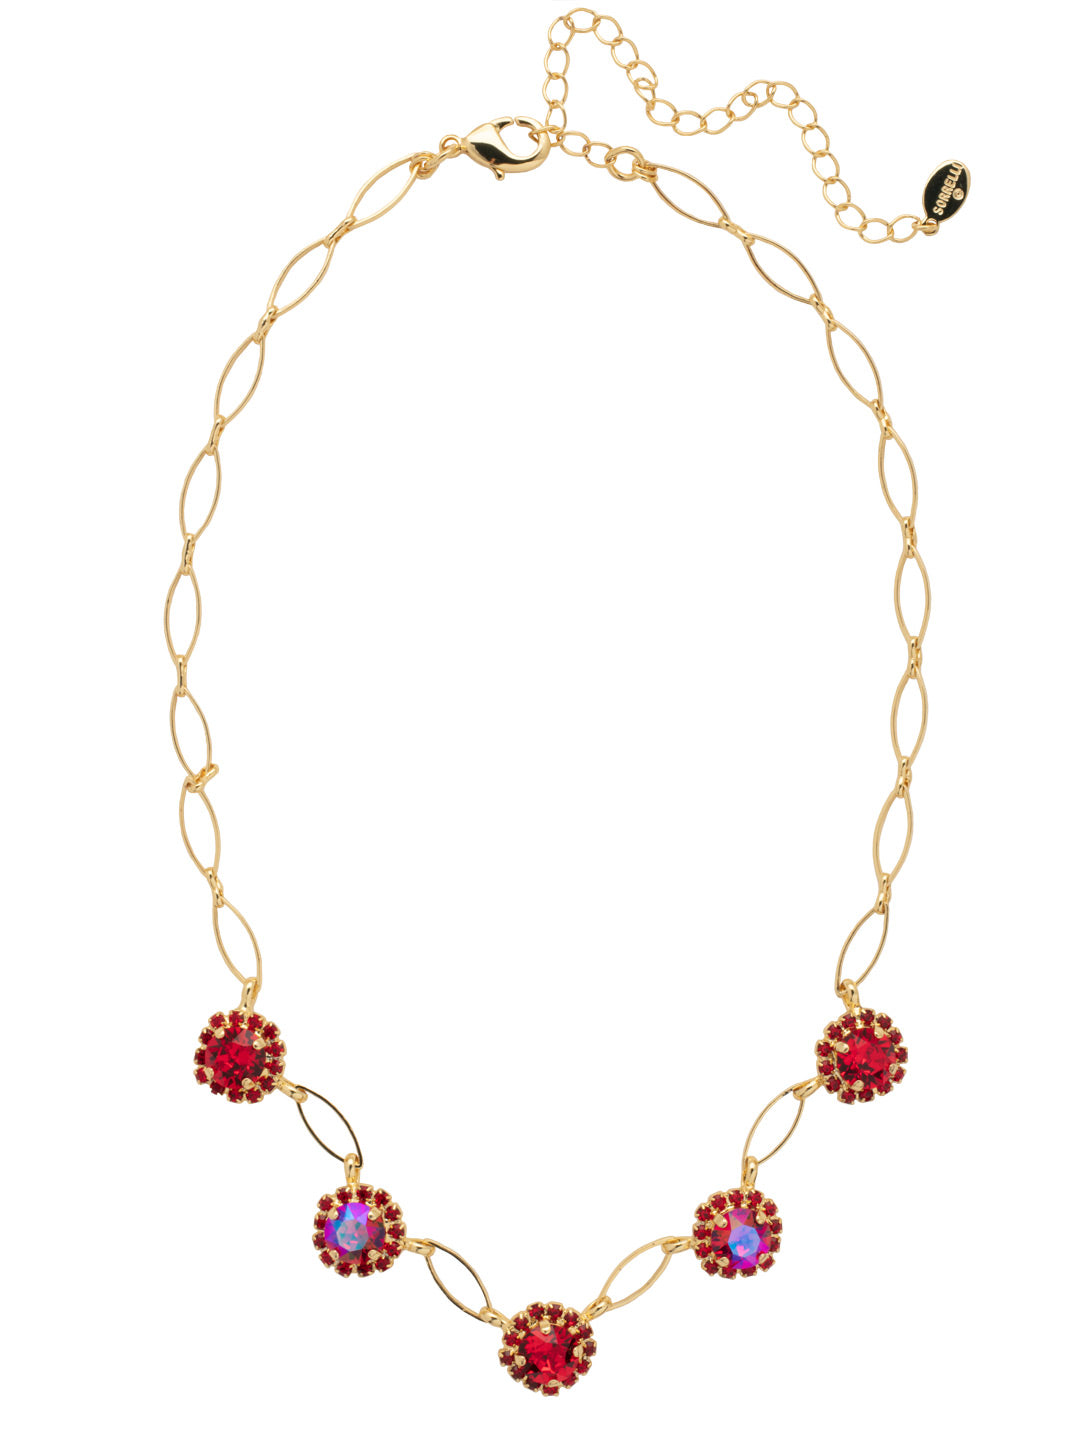 Haute Halo Oval Tennis Necklace - NEY12BGCB - <p>The Haute Halo Oval Tennis Necklace combines halo set round crystals and small oval hoops, linked together, creating a stunning statement piece. From Sorrelli's Cranberry collection in our Bright Gold-tone finish.</p>